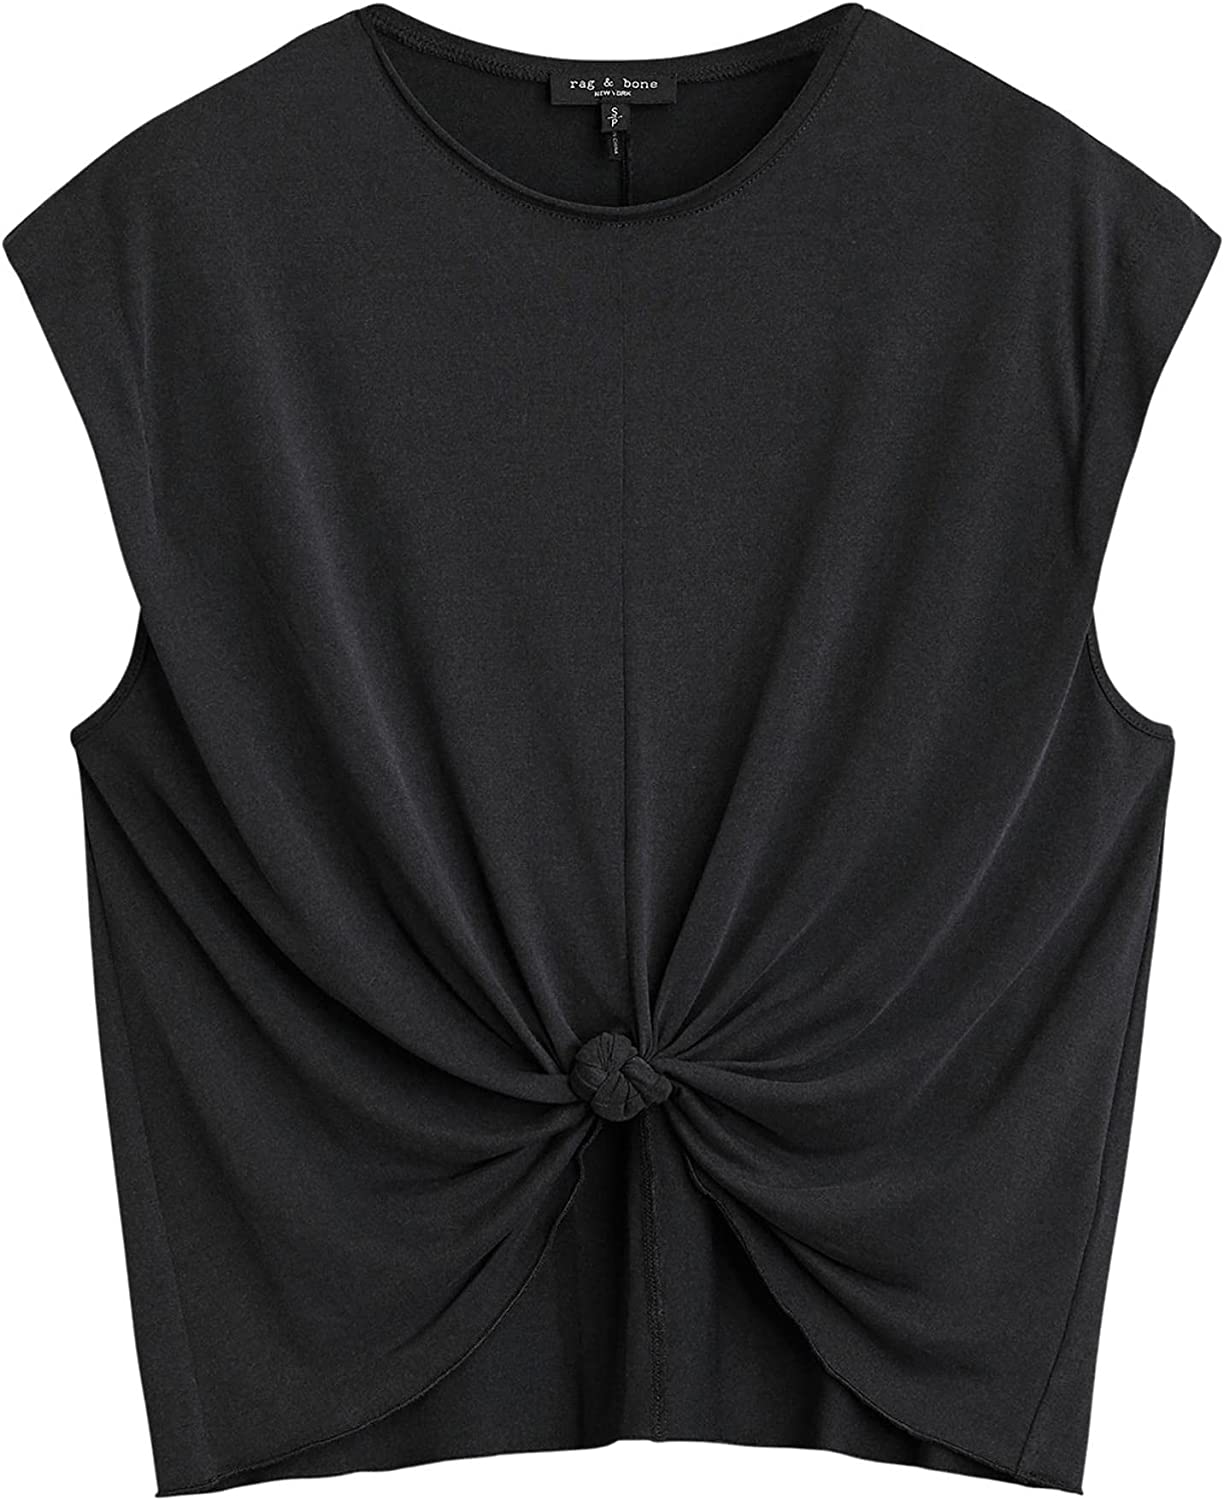 Shop Rag & Bone Women's Jenna Knotted Muscle Tee Solid Black